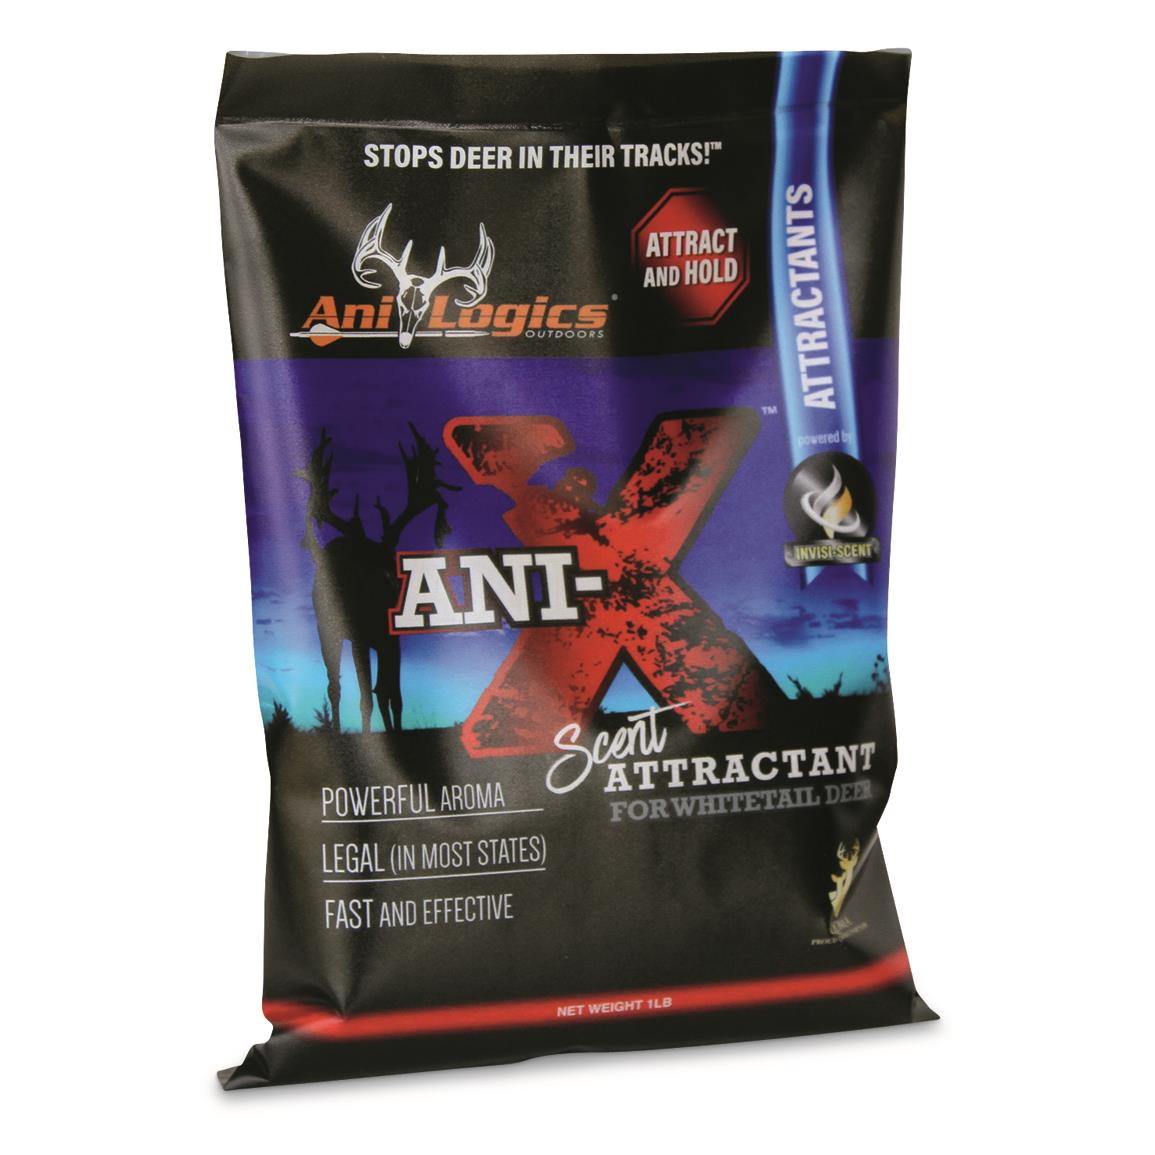 Ani-X Scent Attractant, 1-lb. package